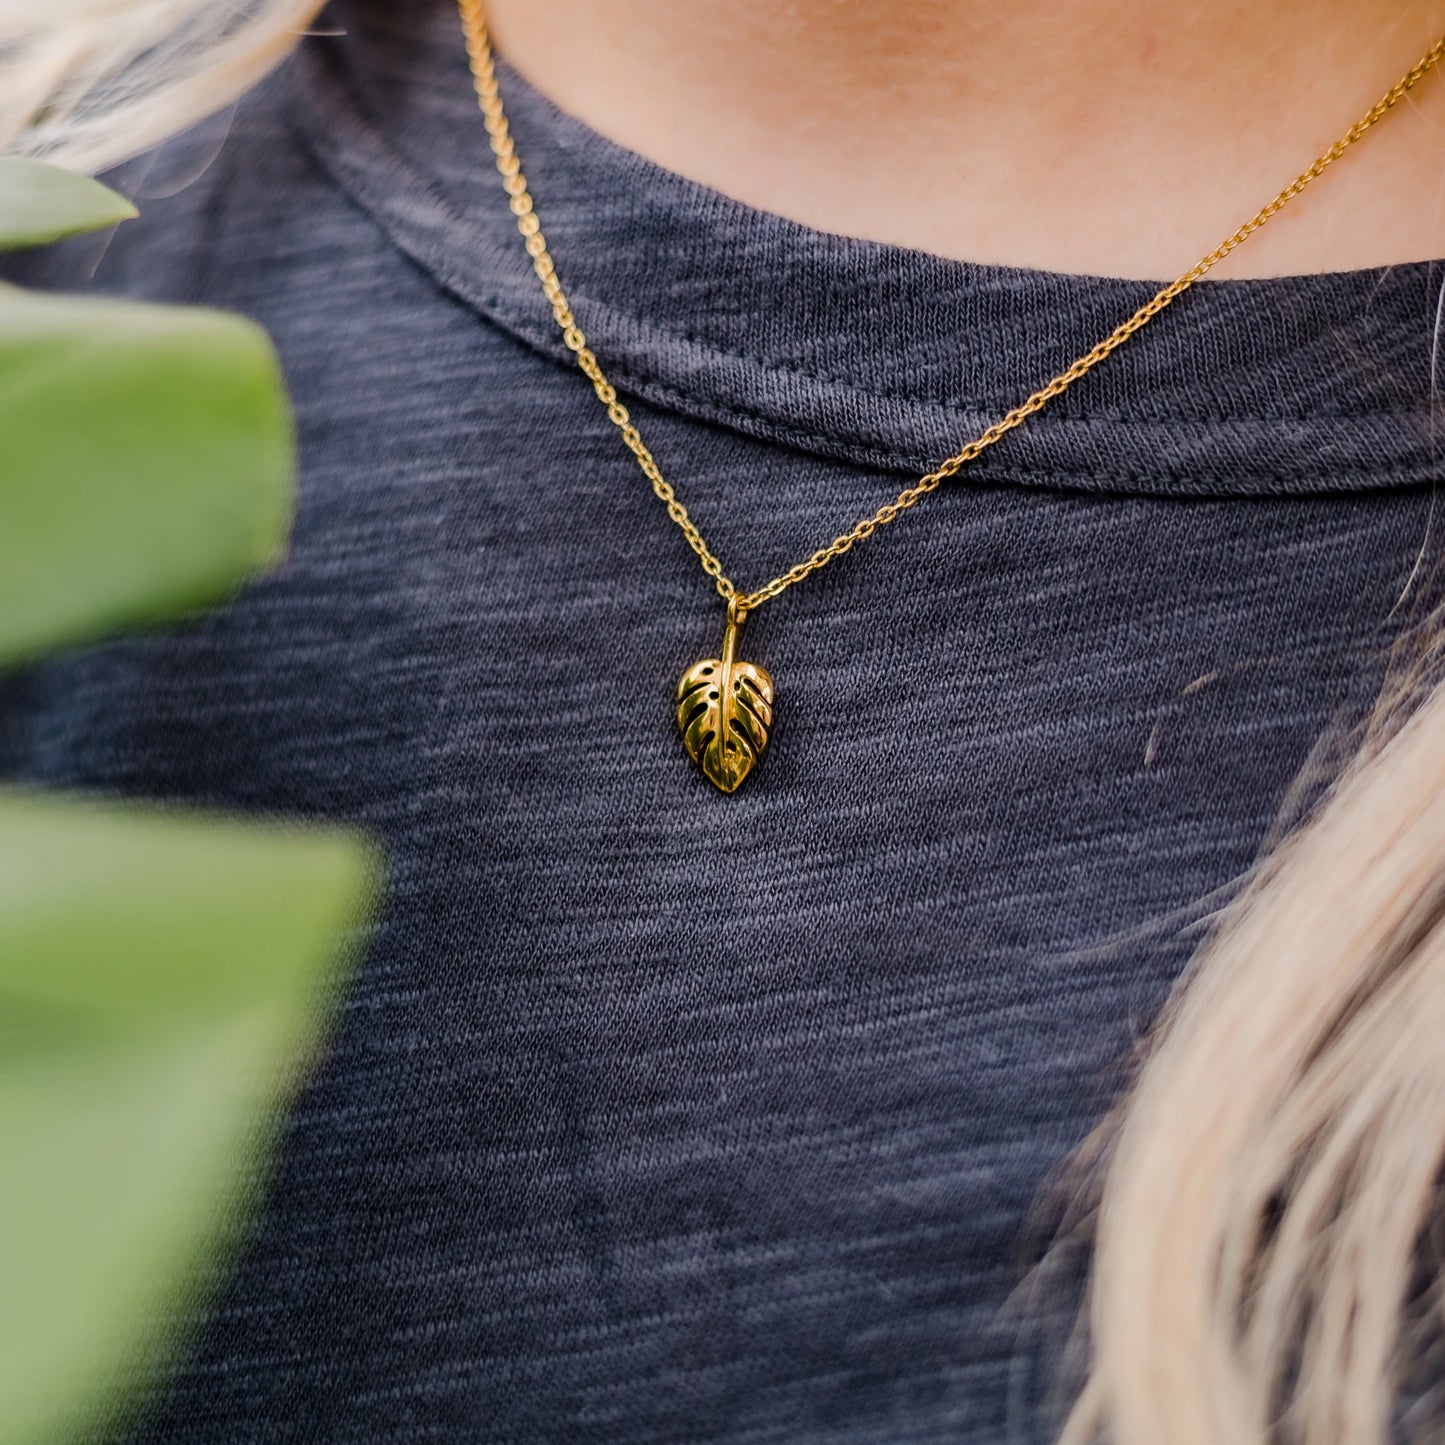 Monstera Necklace